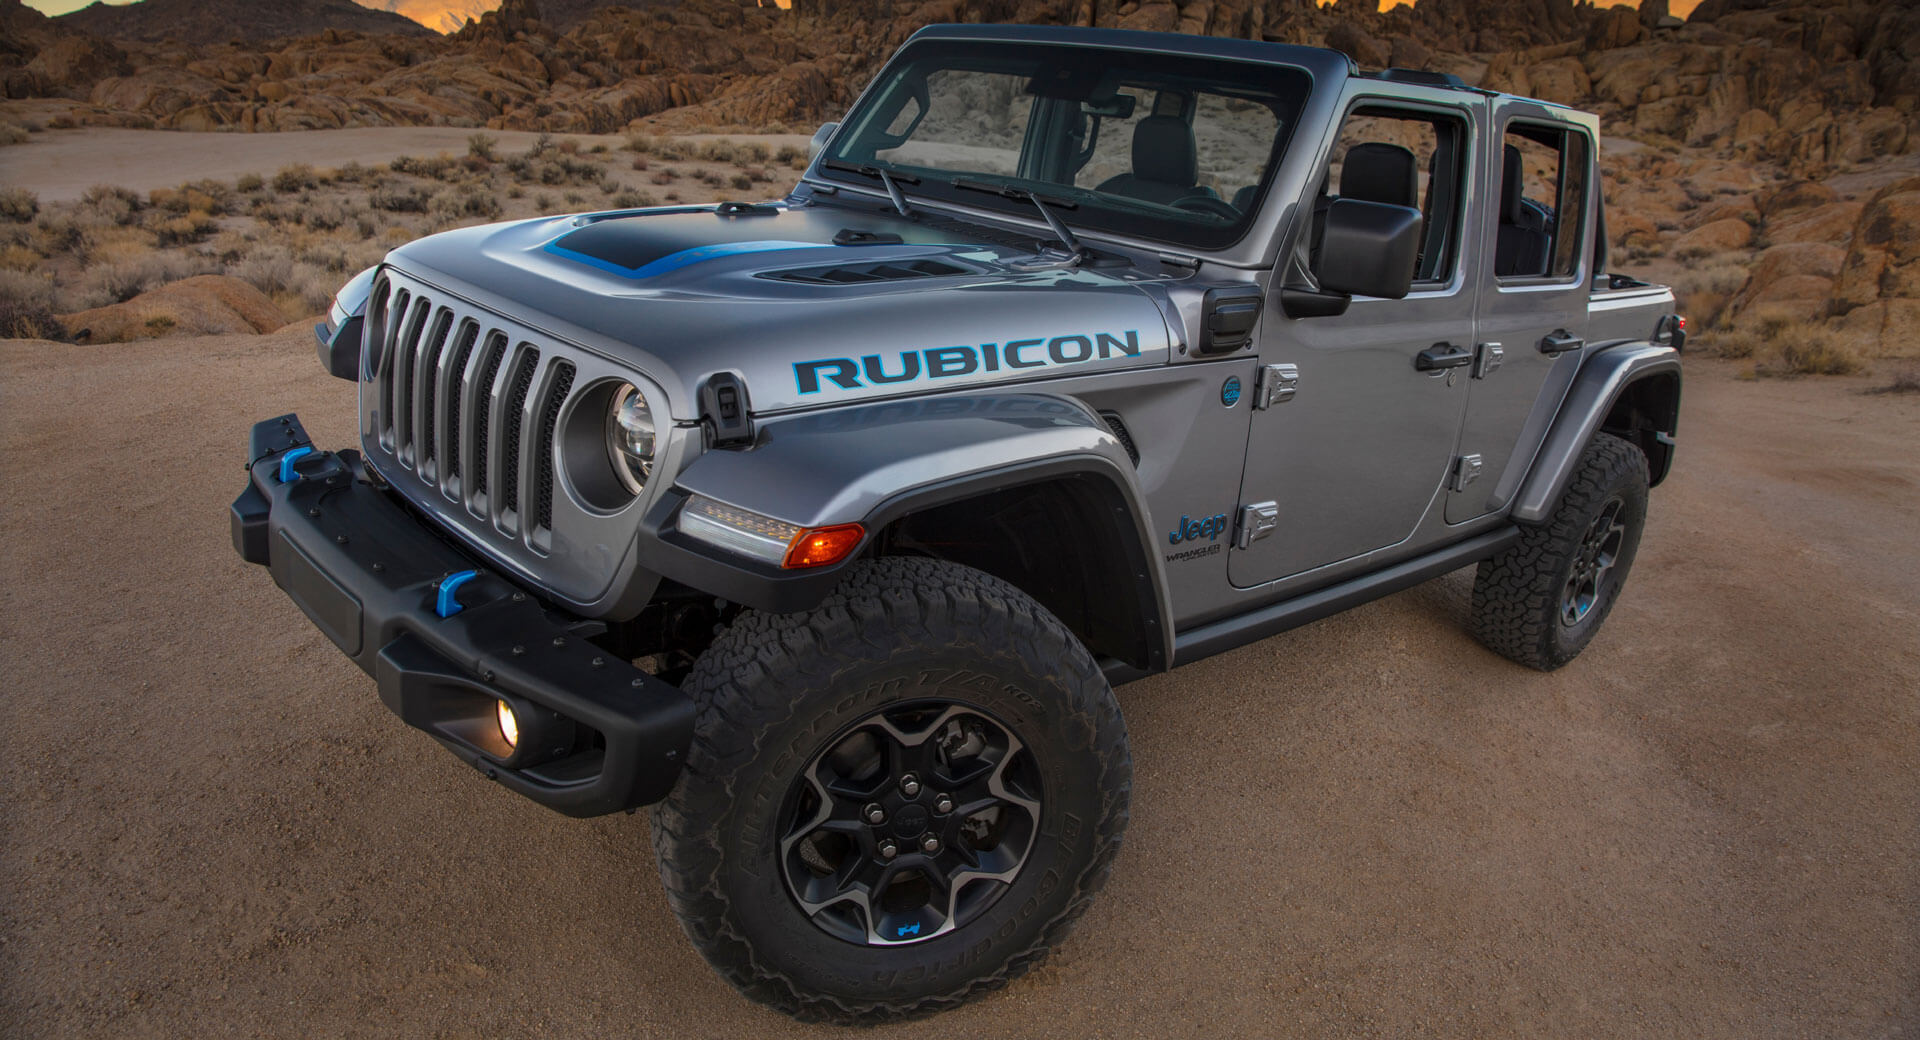 2021 Jeep Wrangler 4xe Plugs Into The Heart Of The 4×4 Class With 375 HP |  Carscoops